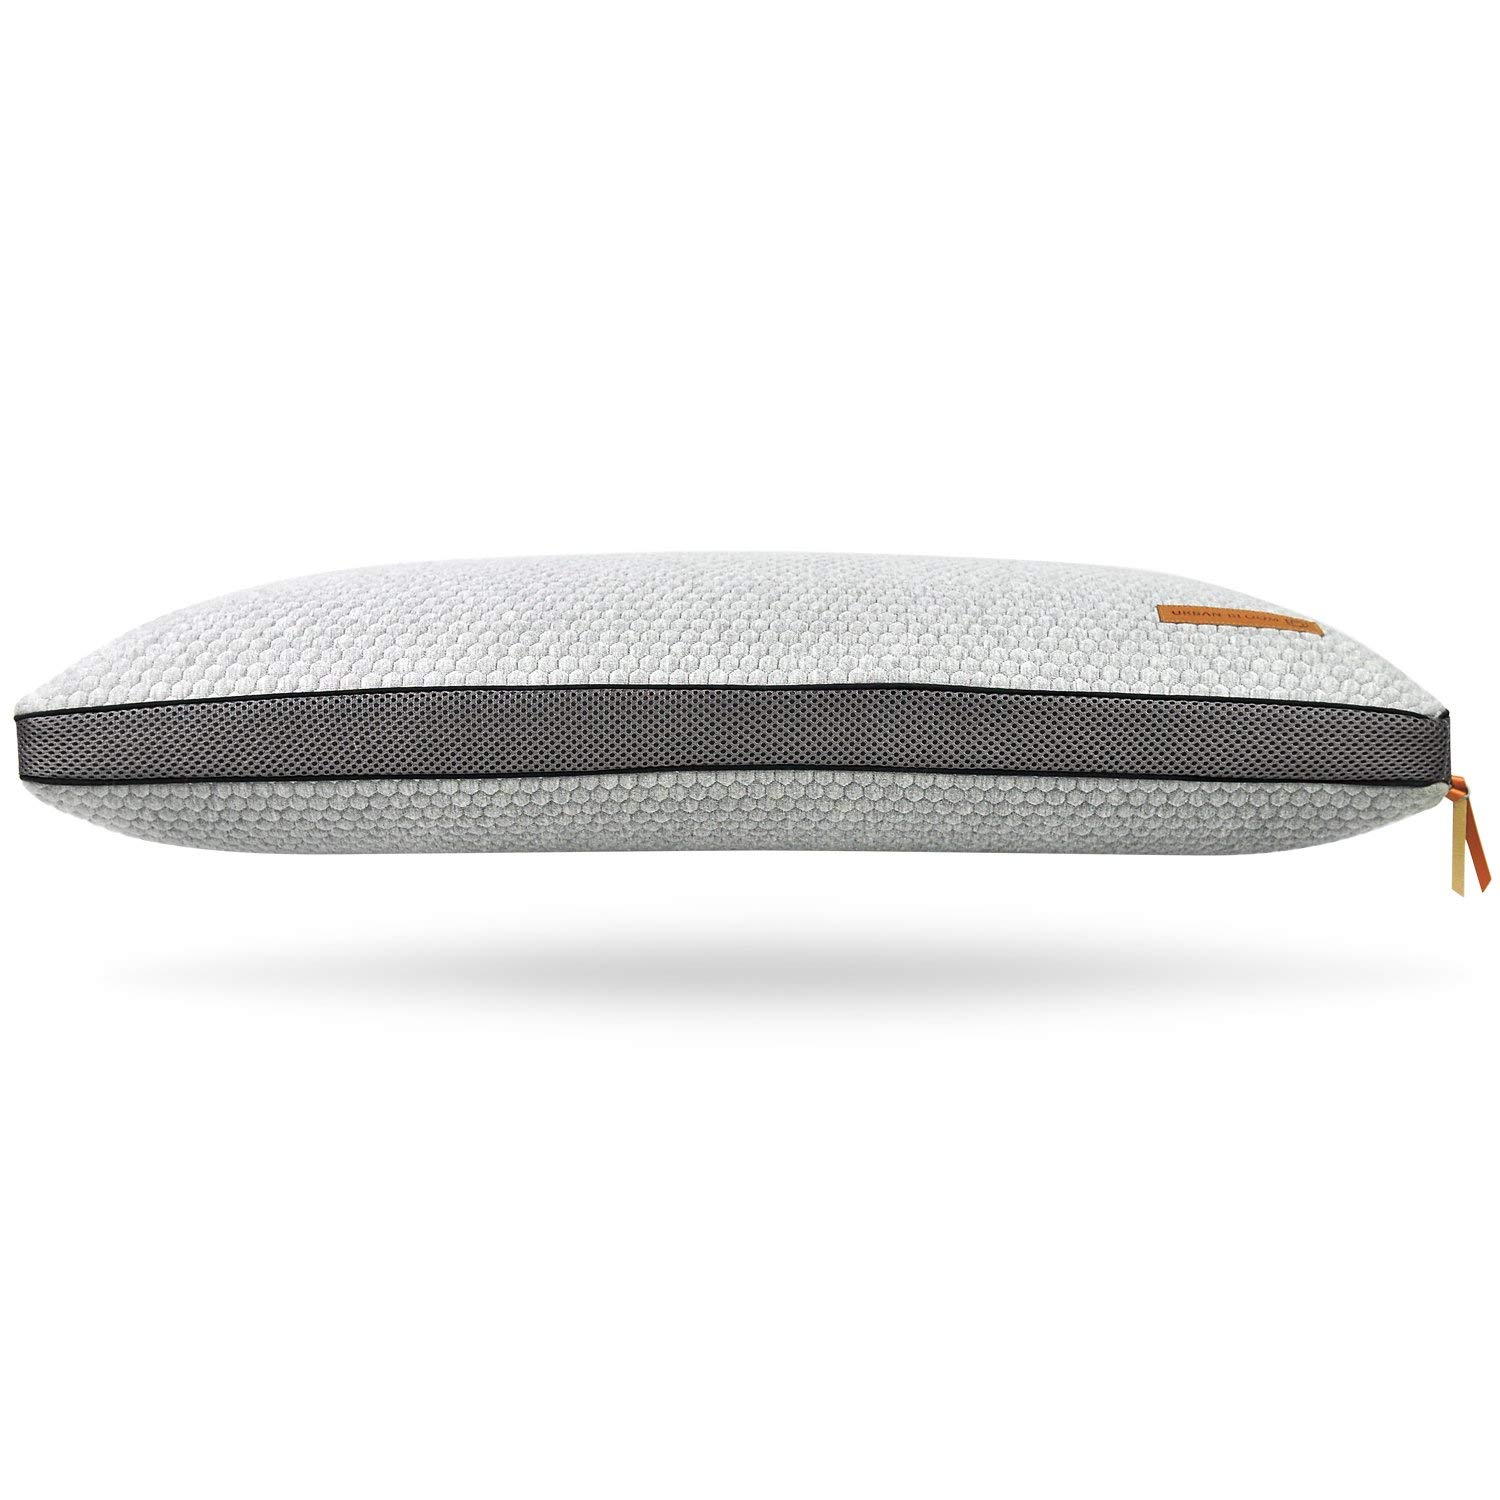 Domus Pillow from Urban Bloom